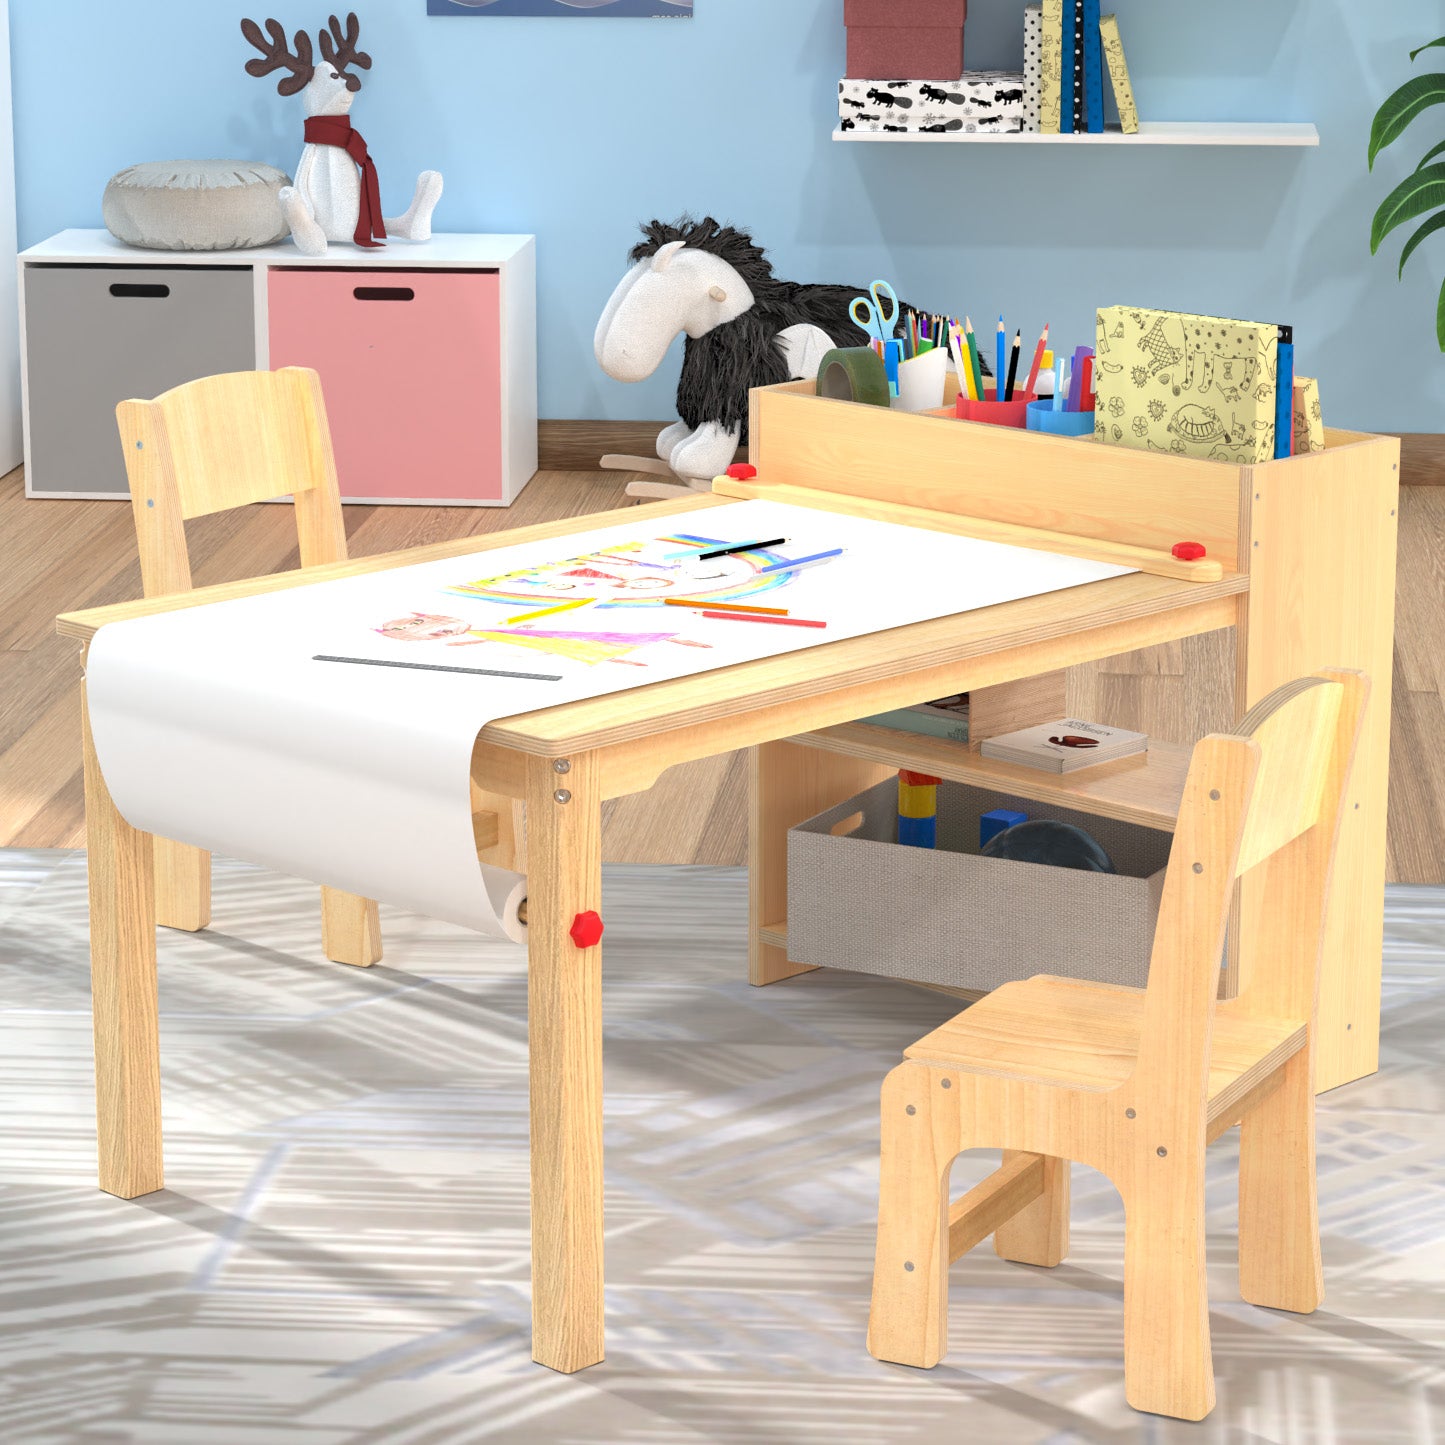 Children Art Activity Table and Drawing Table